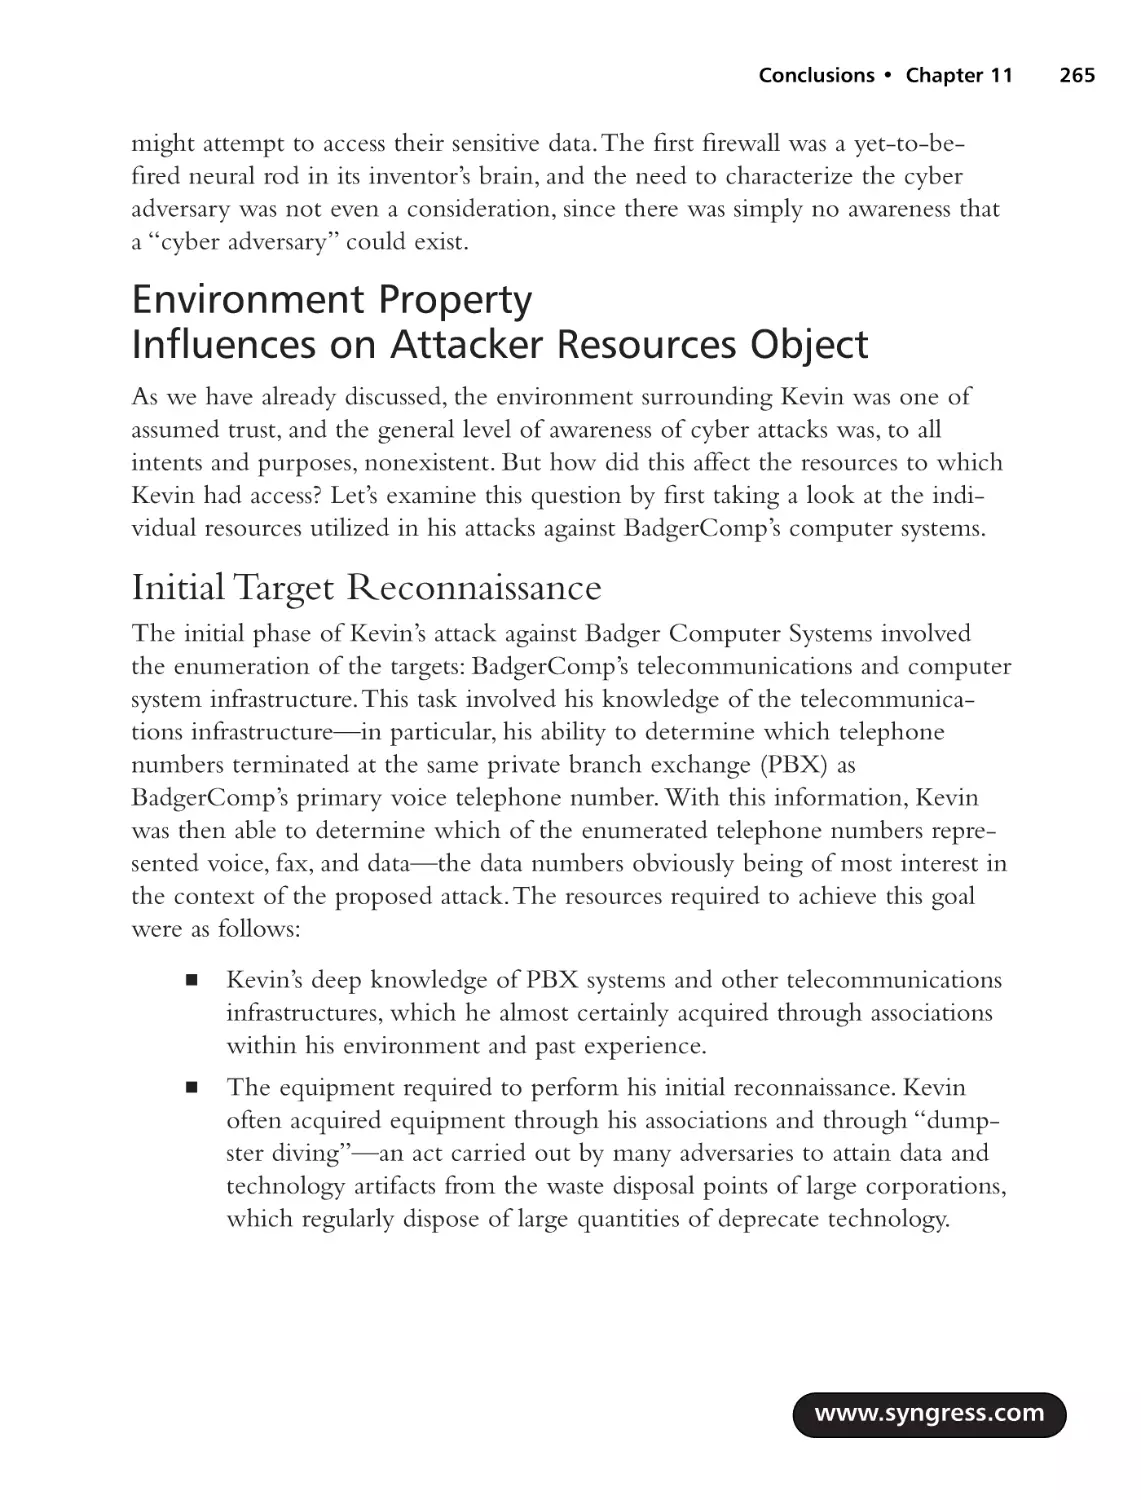 Environment Property Influences on Attacker Resources Object
Initial Target Reconnaissance